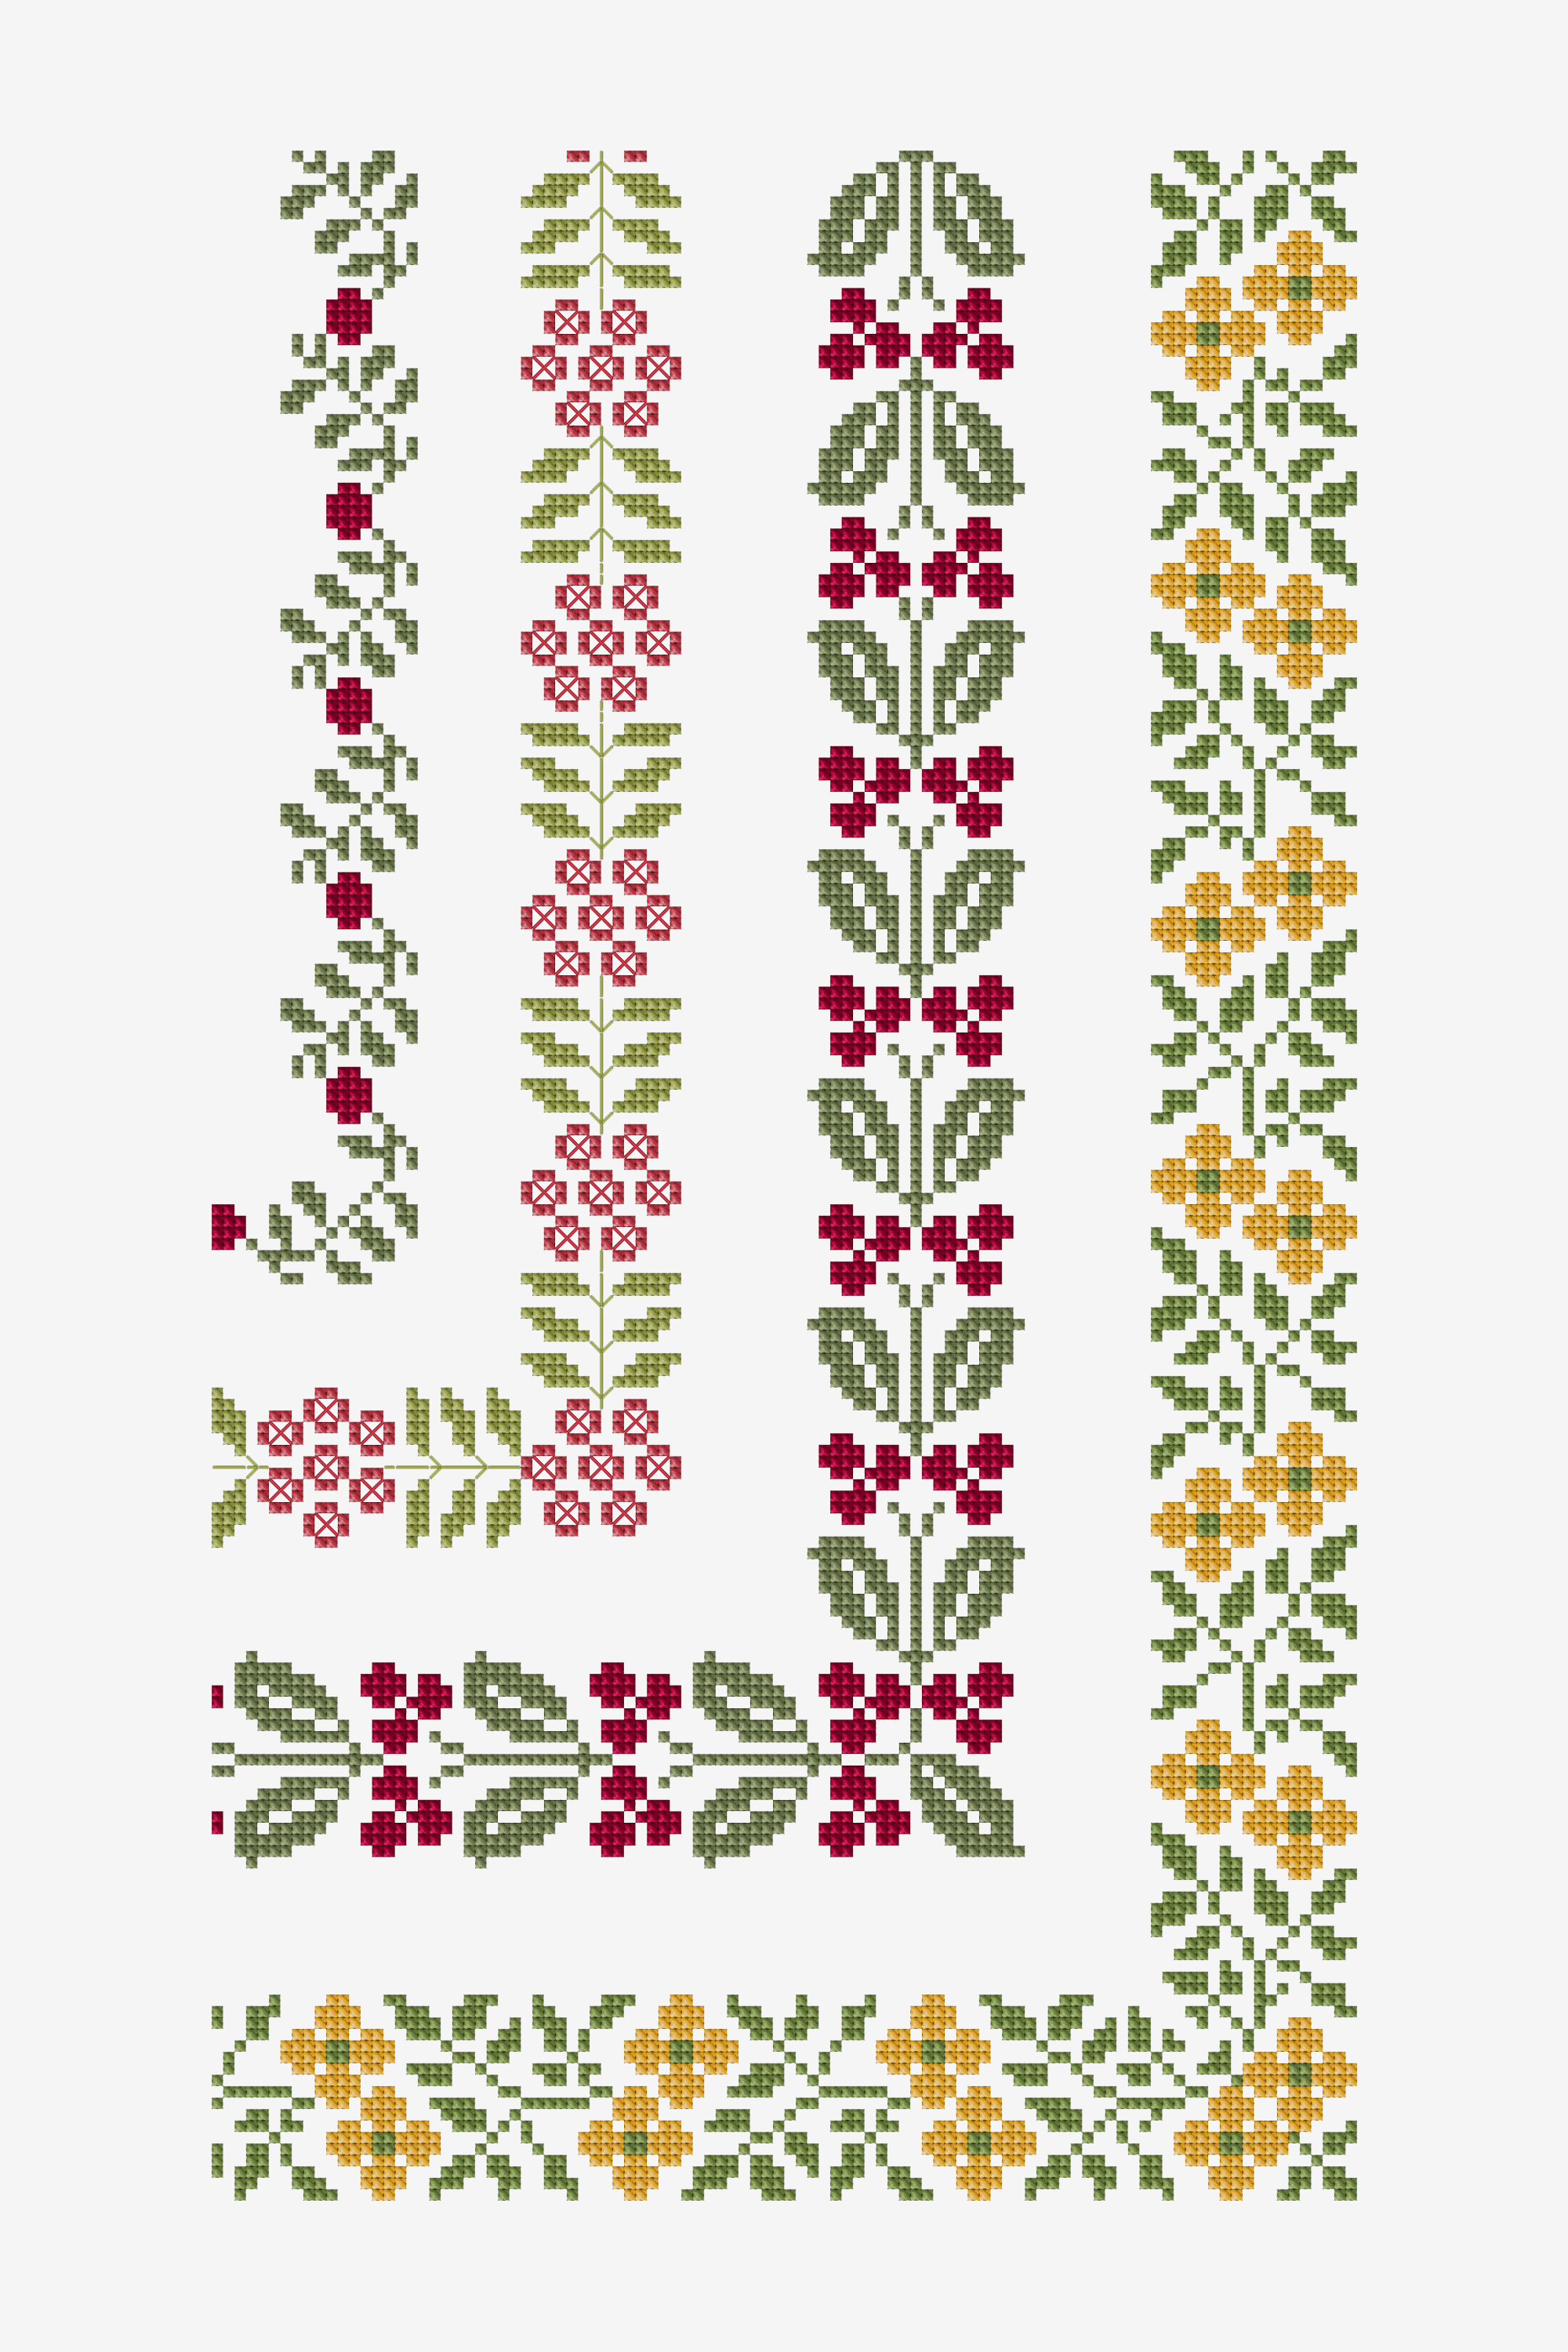 Counted cross stitch.Cross stitch Cross stitch pattern Embroidery design PDF cross stitch pattern Port View Hand embroidery pattern